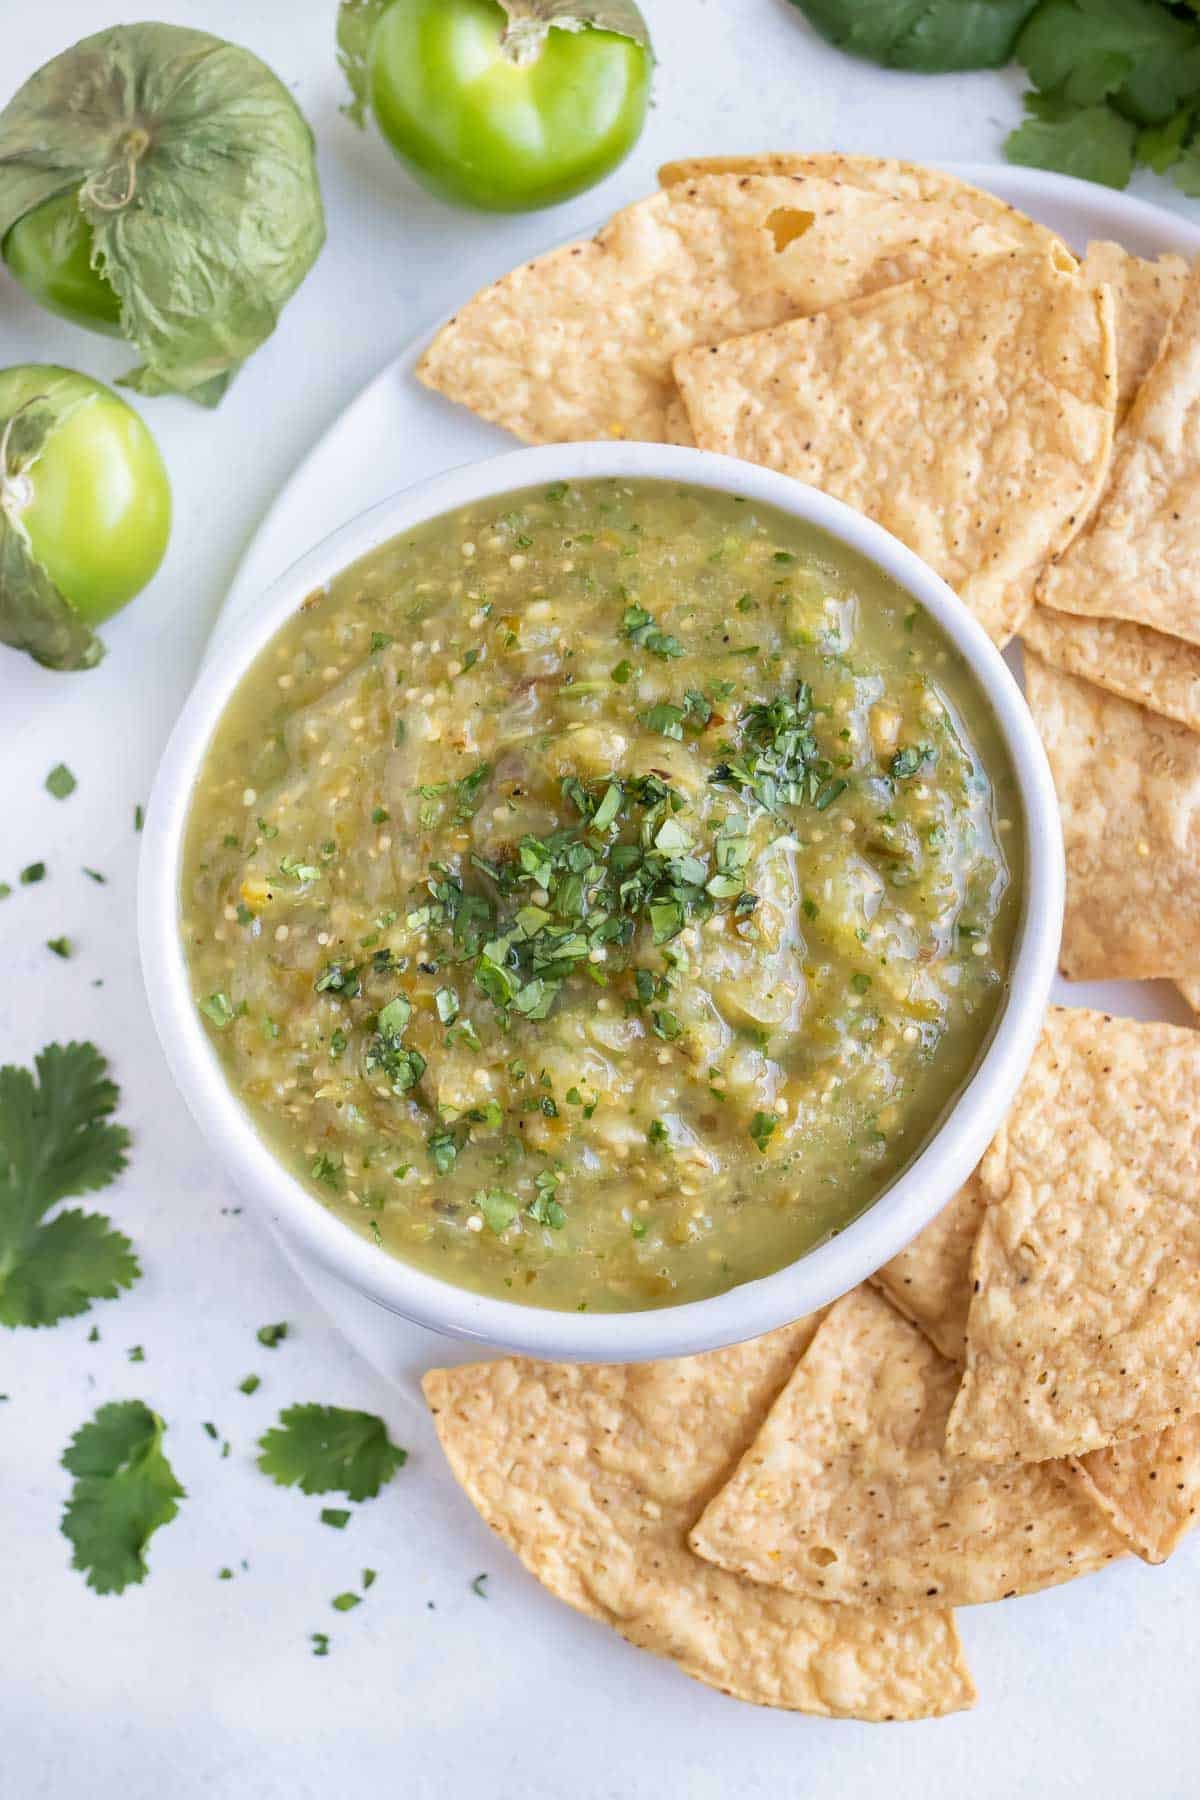 A bowl of tomatillo salsa verde is placed beside tortilla chips.